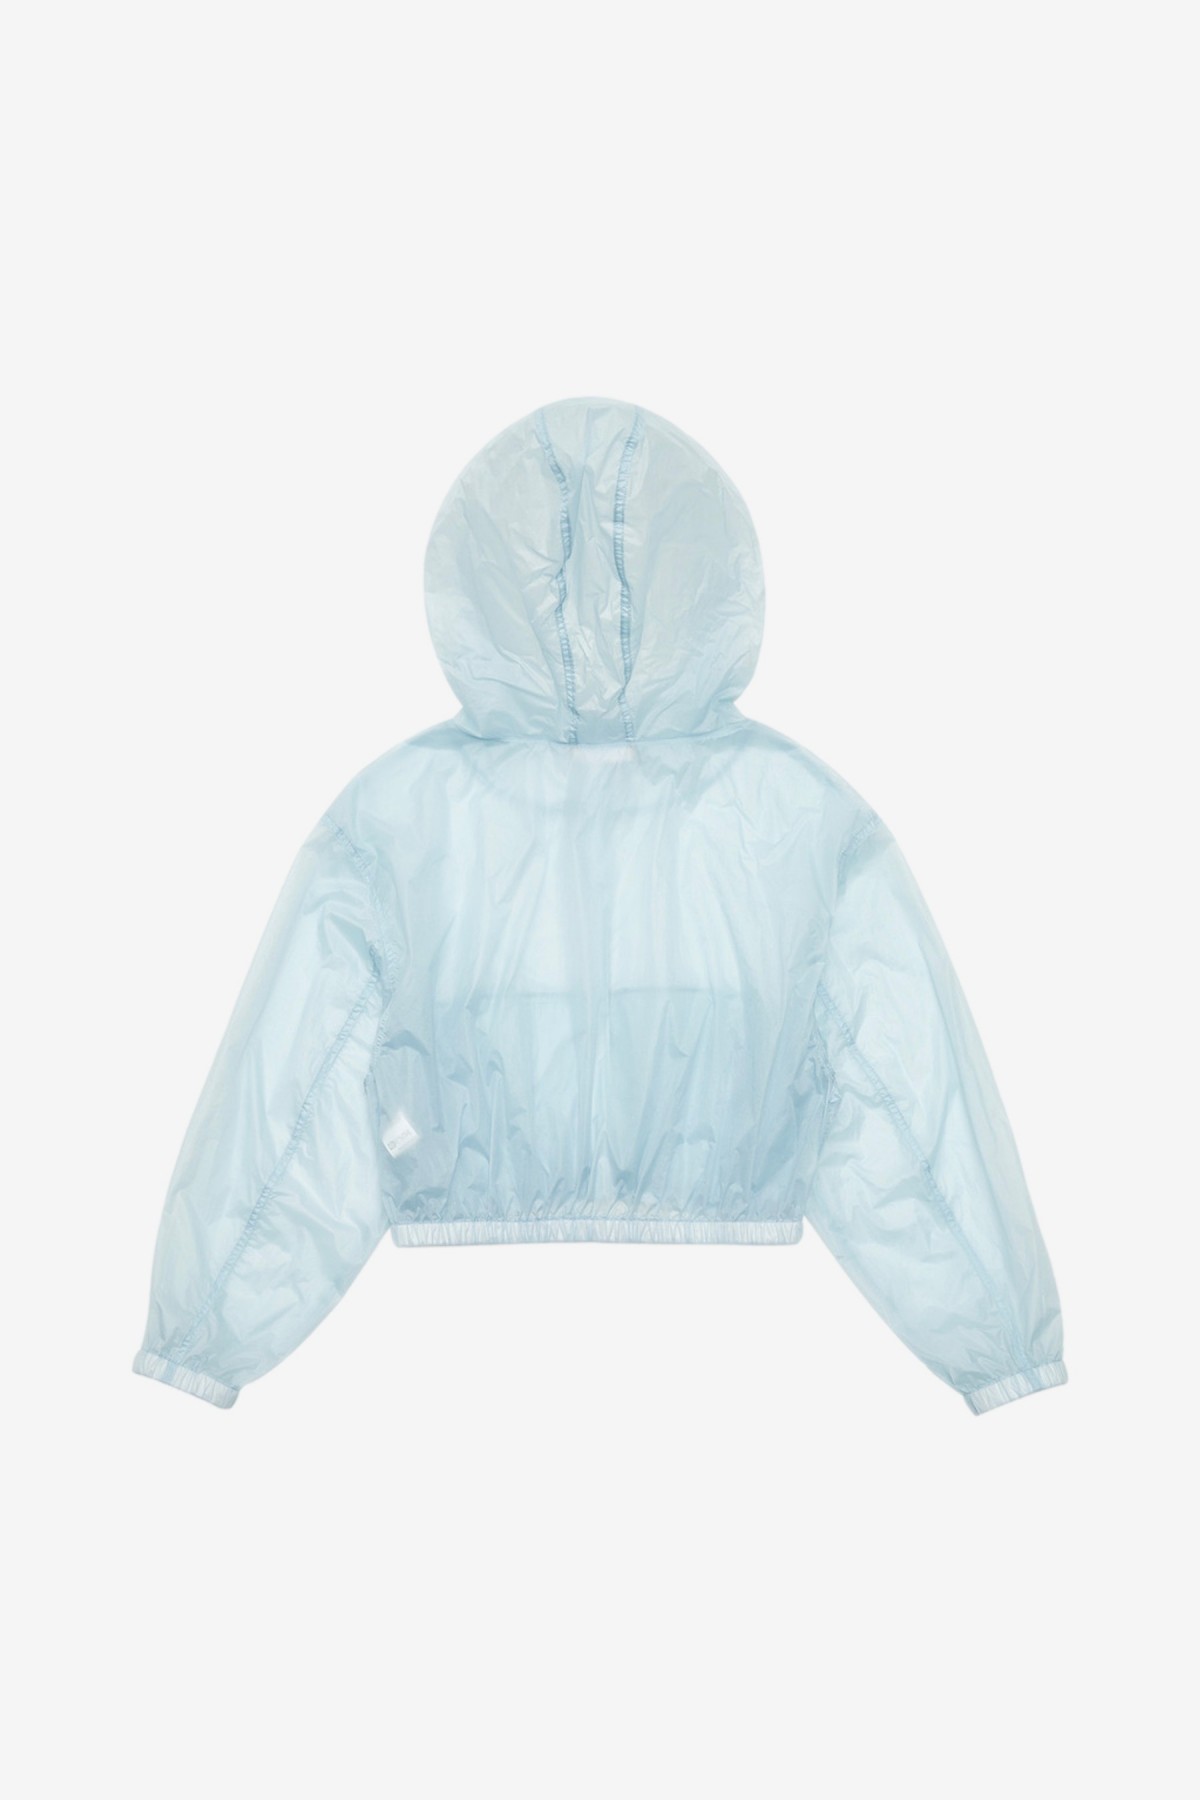 Amomento Reversible Shirring Crop Hooded Jumper in Sky Blue